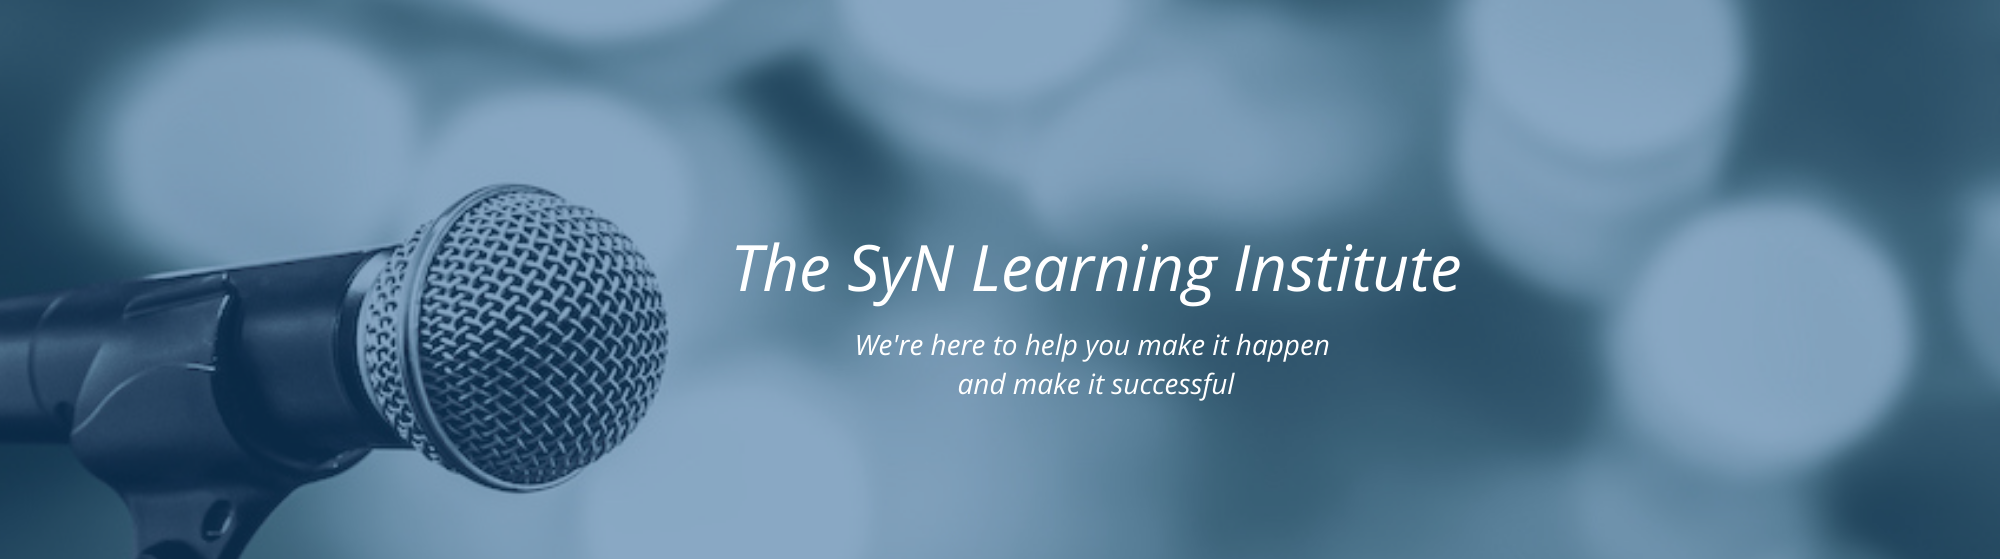 The SyN Learning Institute